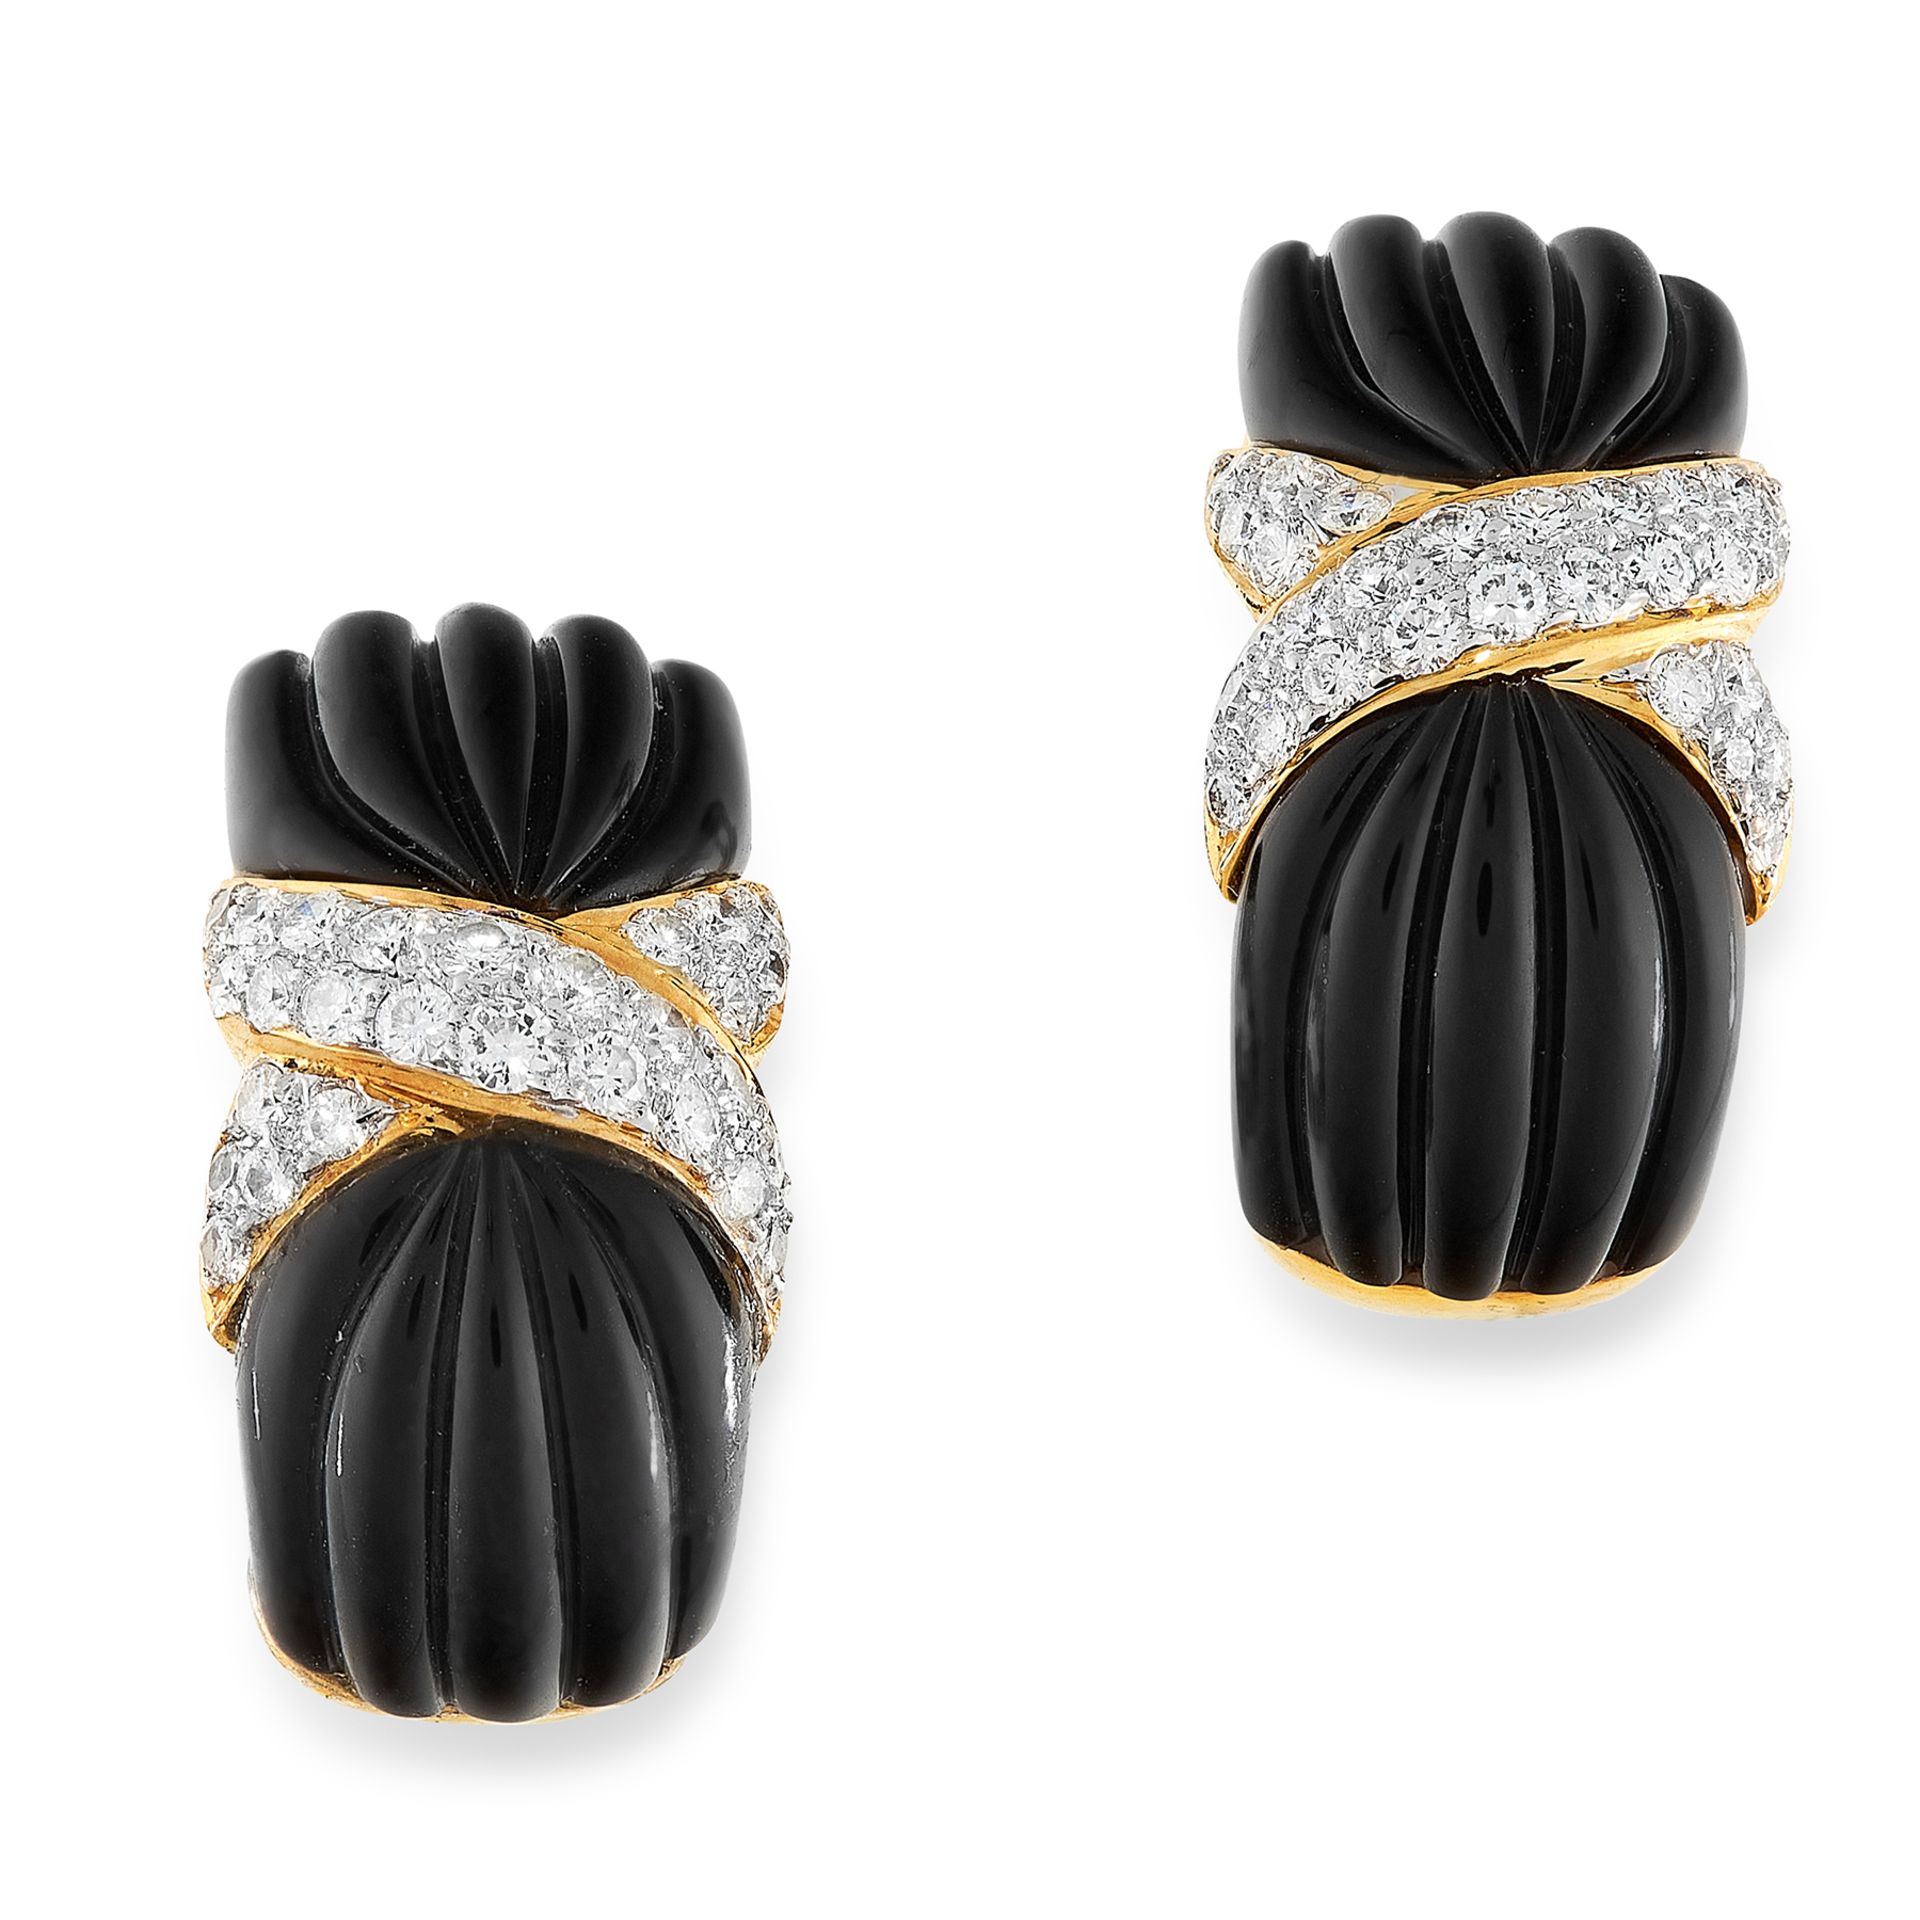 A PAIR OF VINTAGE ONYX AND DIAMOND CLIP EARRINGS in 18ct yellow gold, each designed as a half hoop